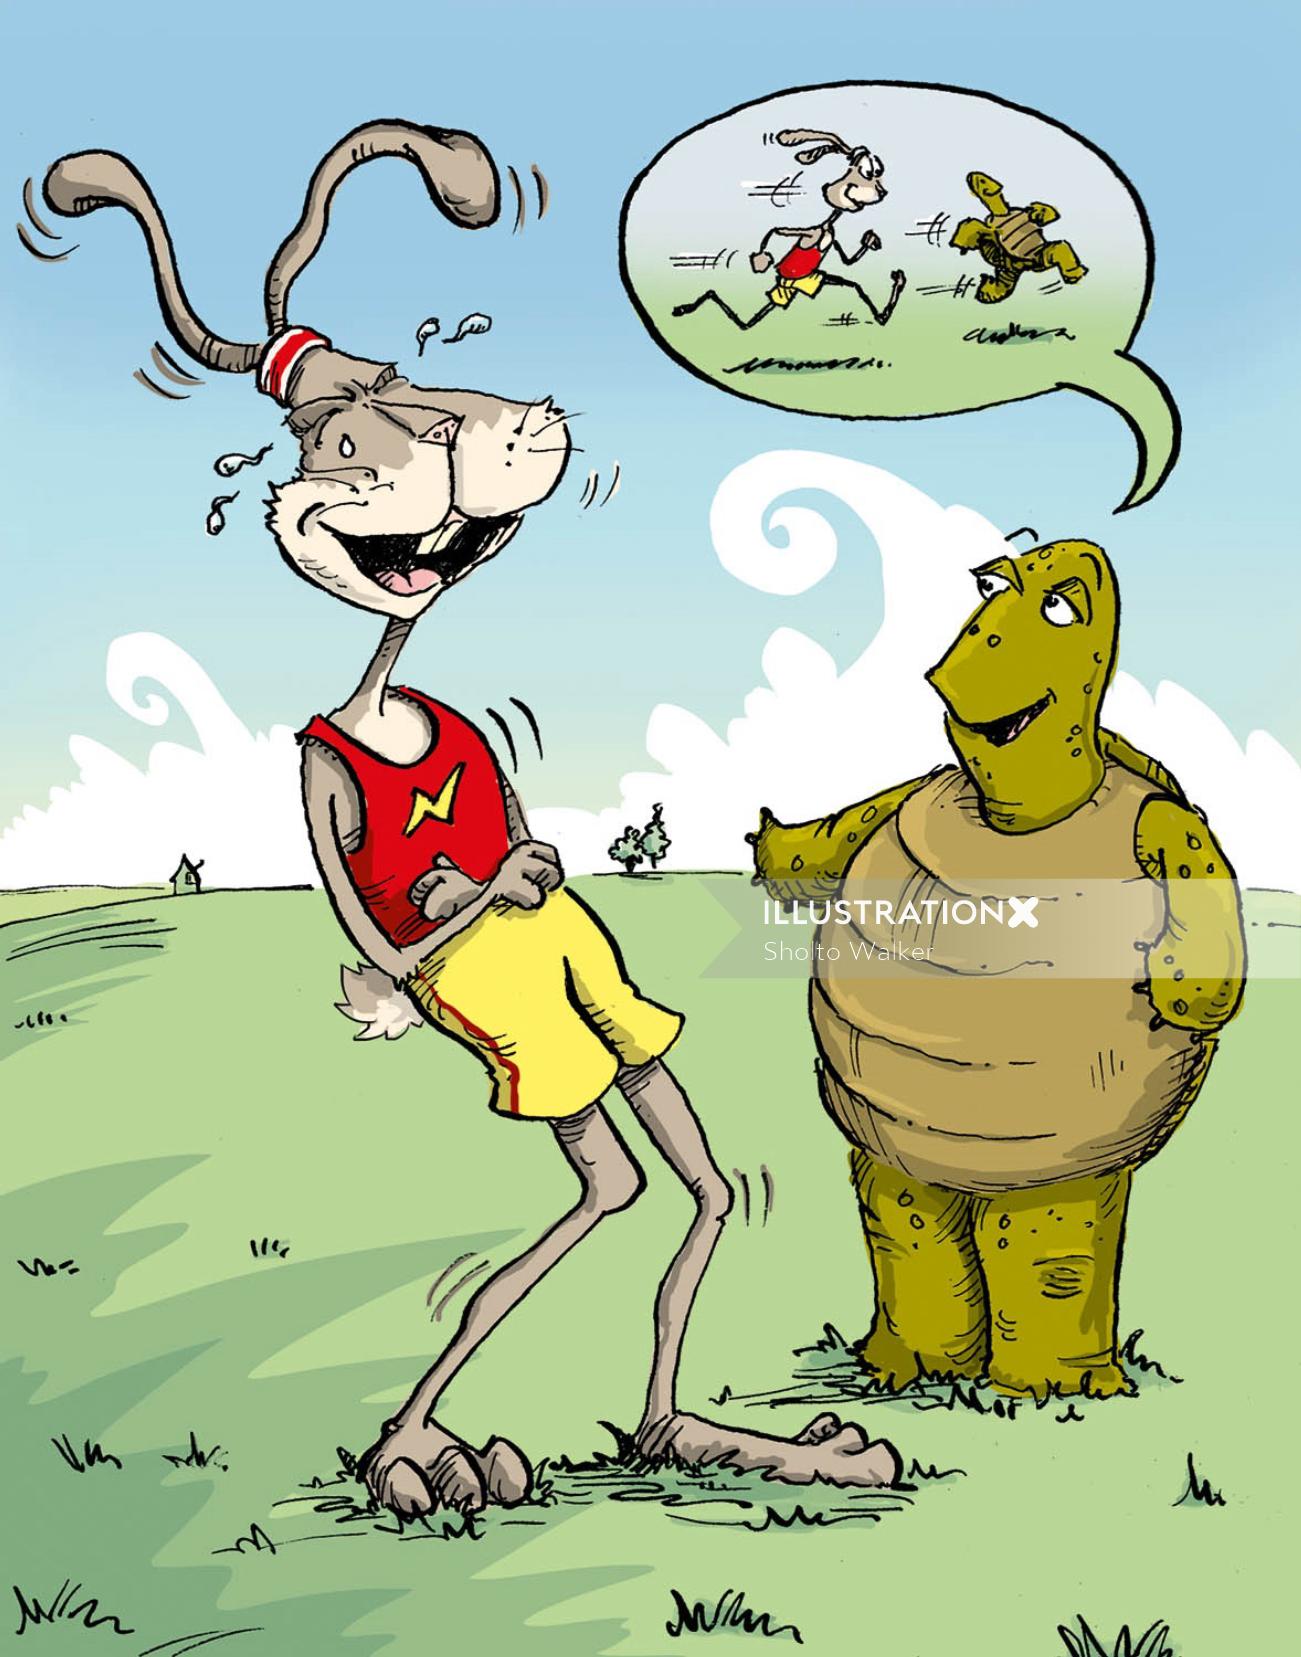 Cartoon & Humour Hare laughing at tortoise
